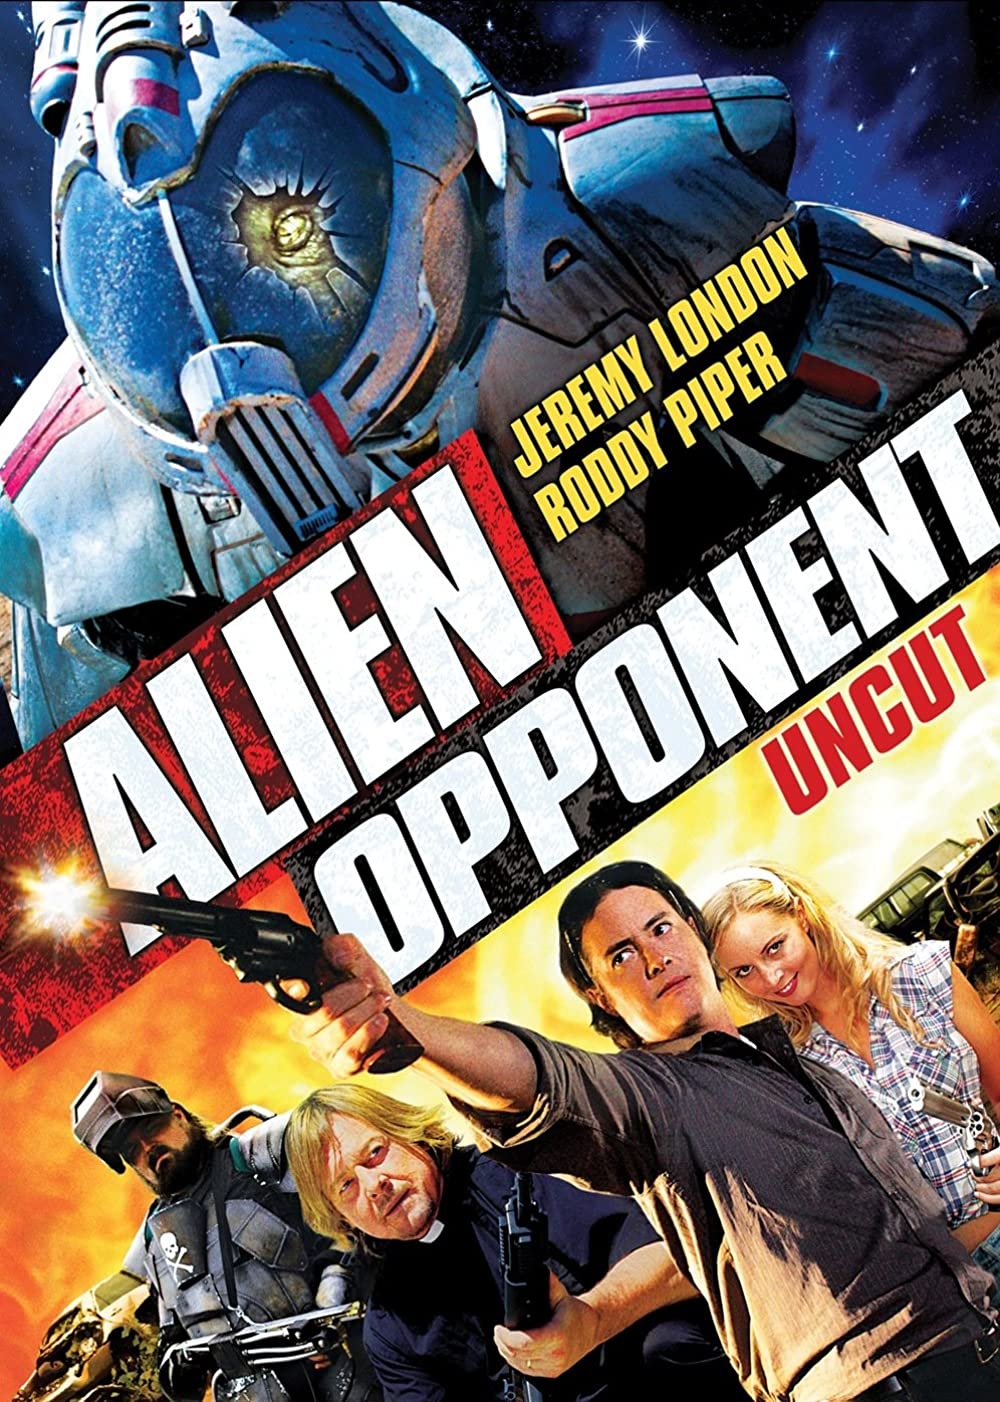 Alien Opponent 2010 Dual Audio Hindi ORG 300MB UNCUT BluRay 480p ESubs Download